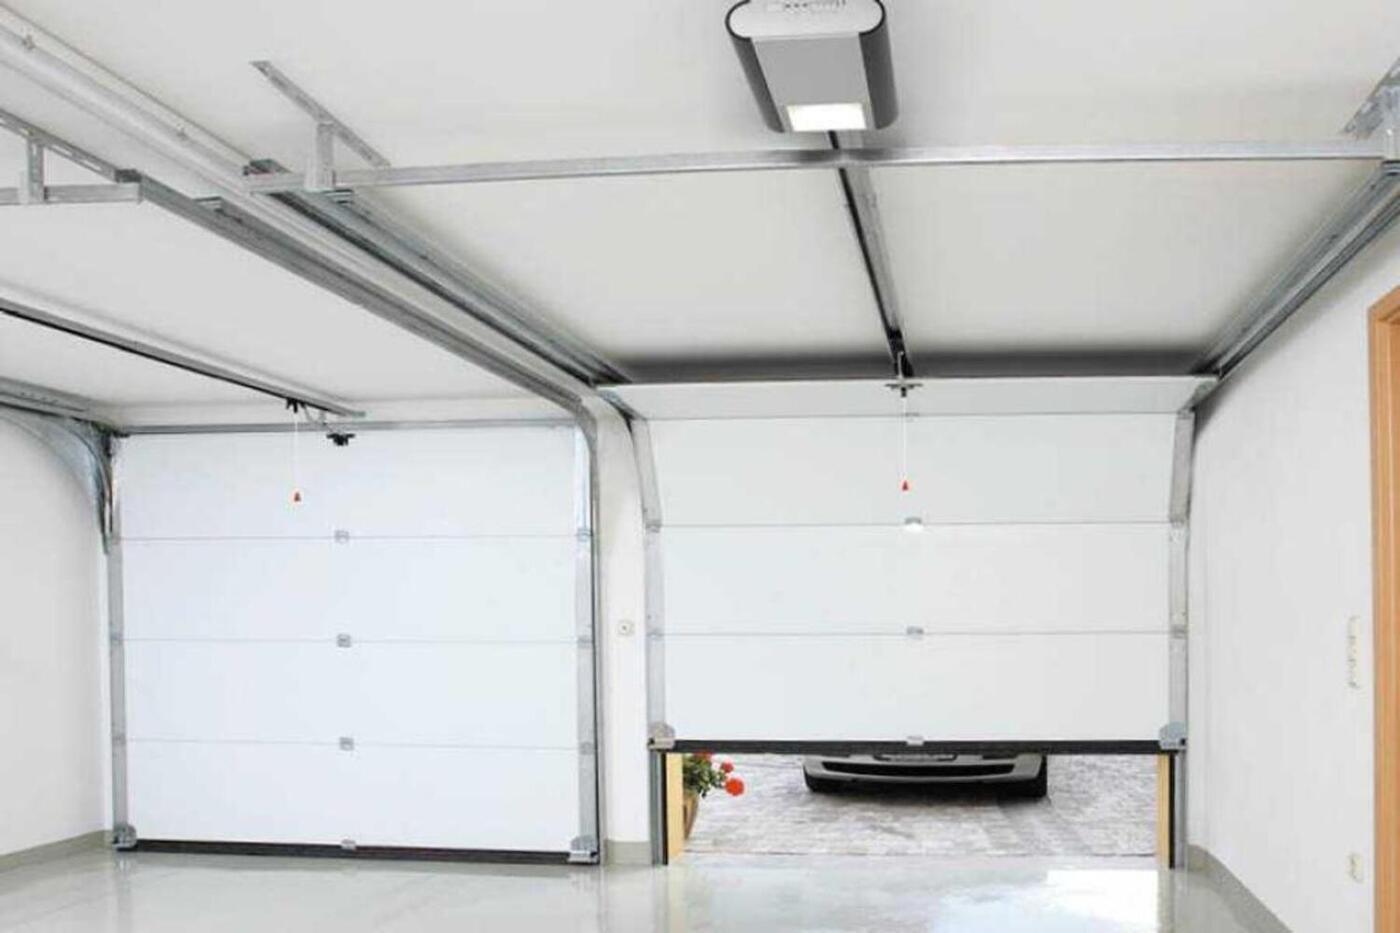 The fully licensed and insured company has become a trusted name among clients in Sacramento and the metropolitan area and the surrounding region by offering exceptional garage door services for commercial and residential properties.